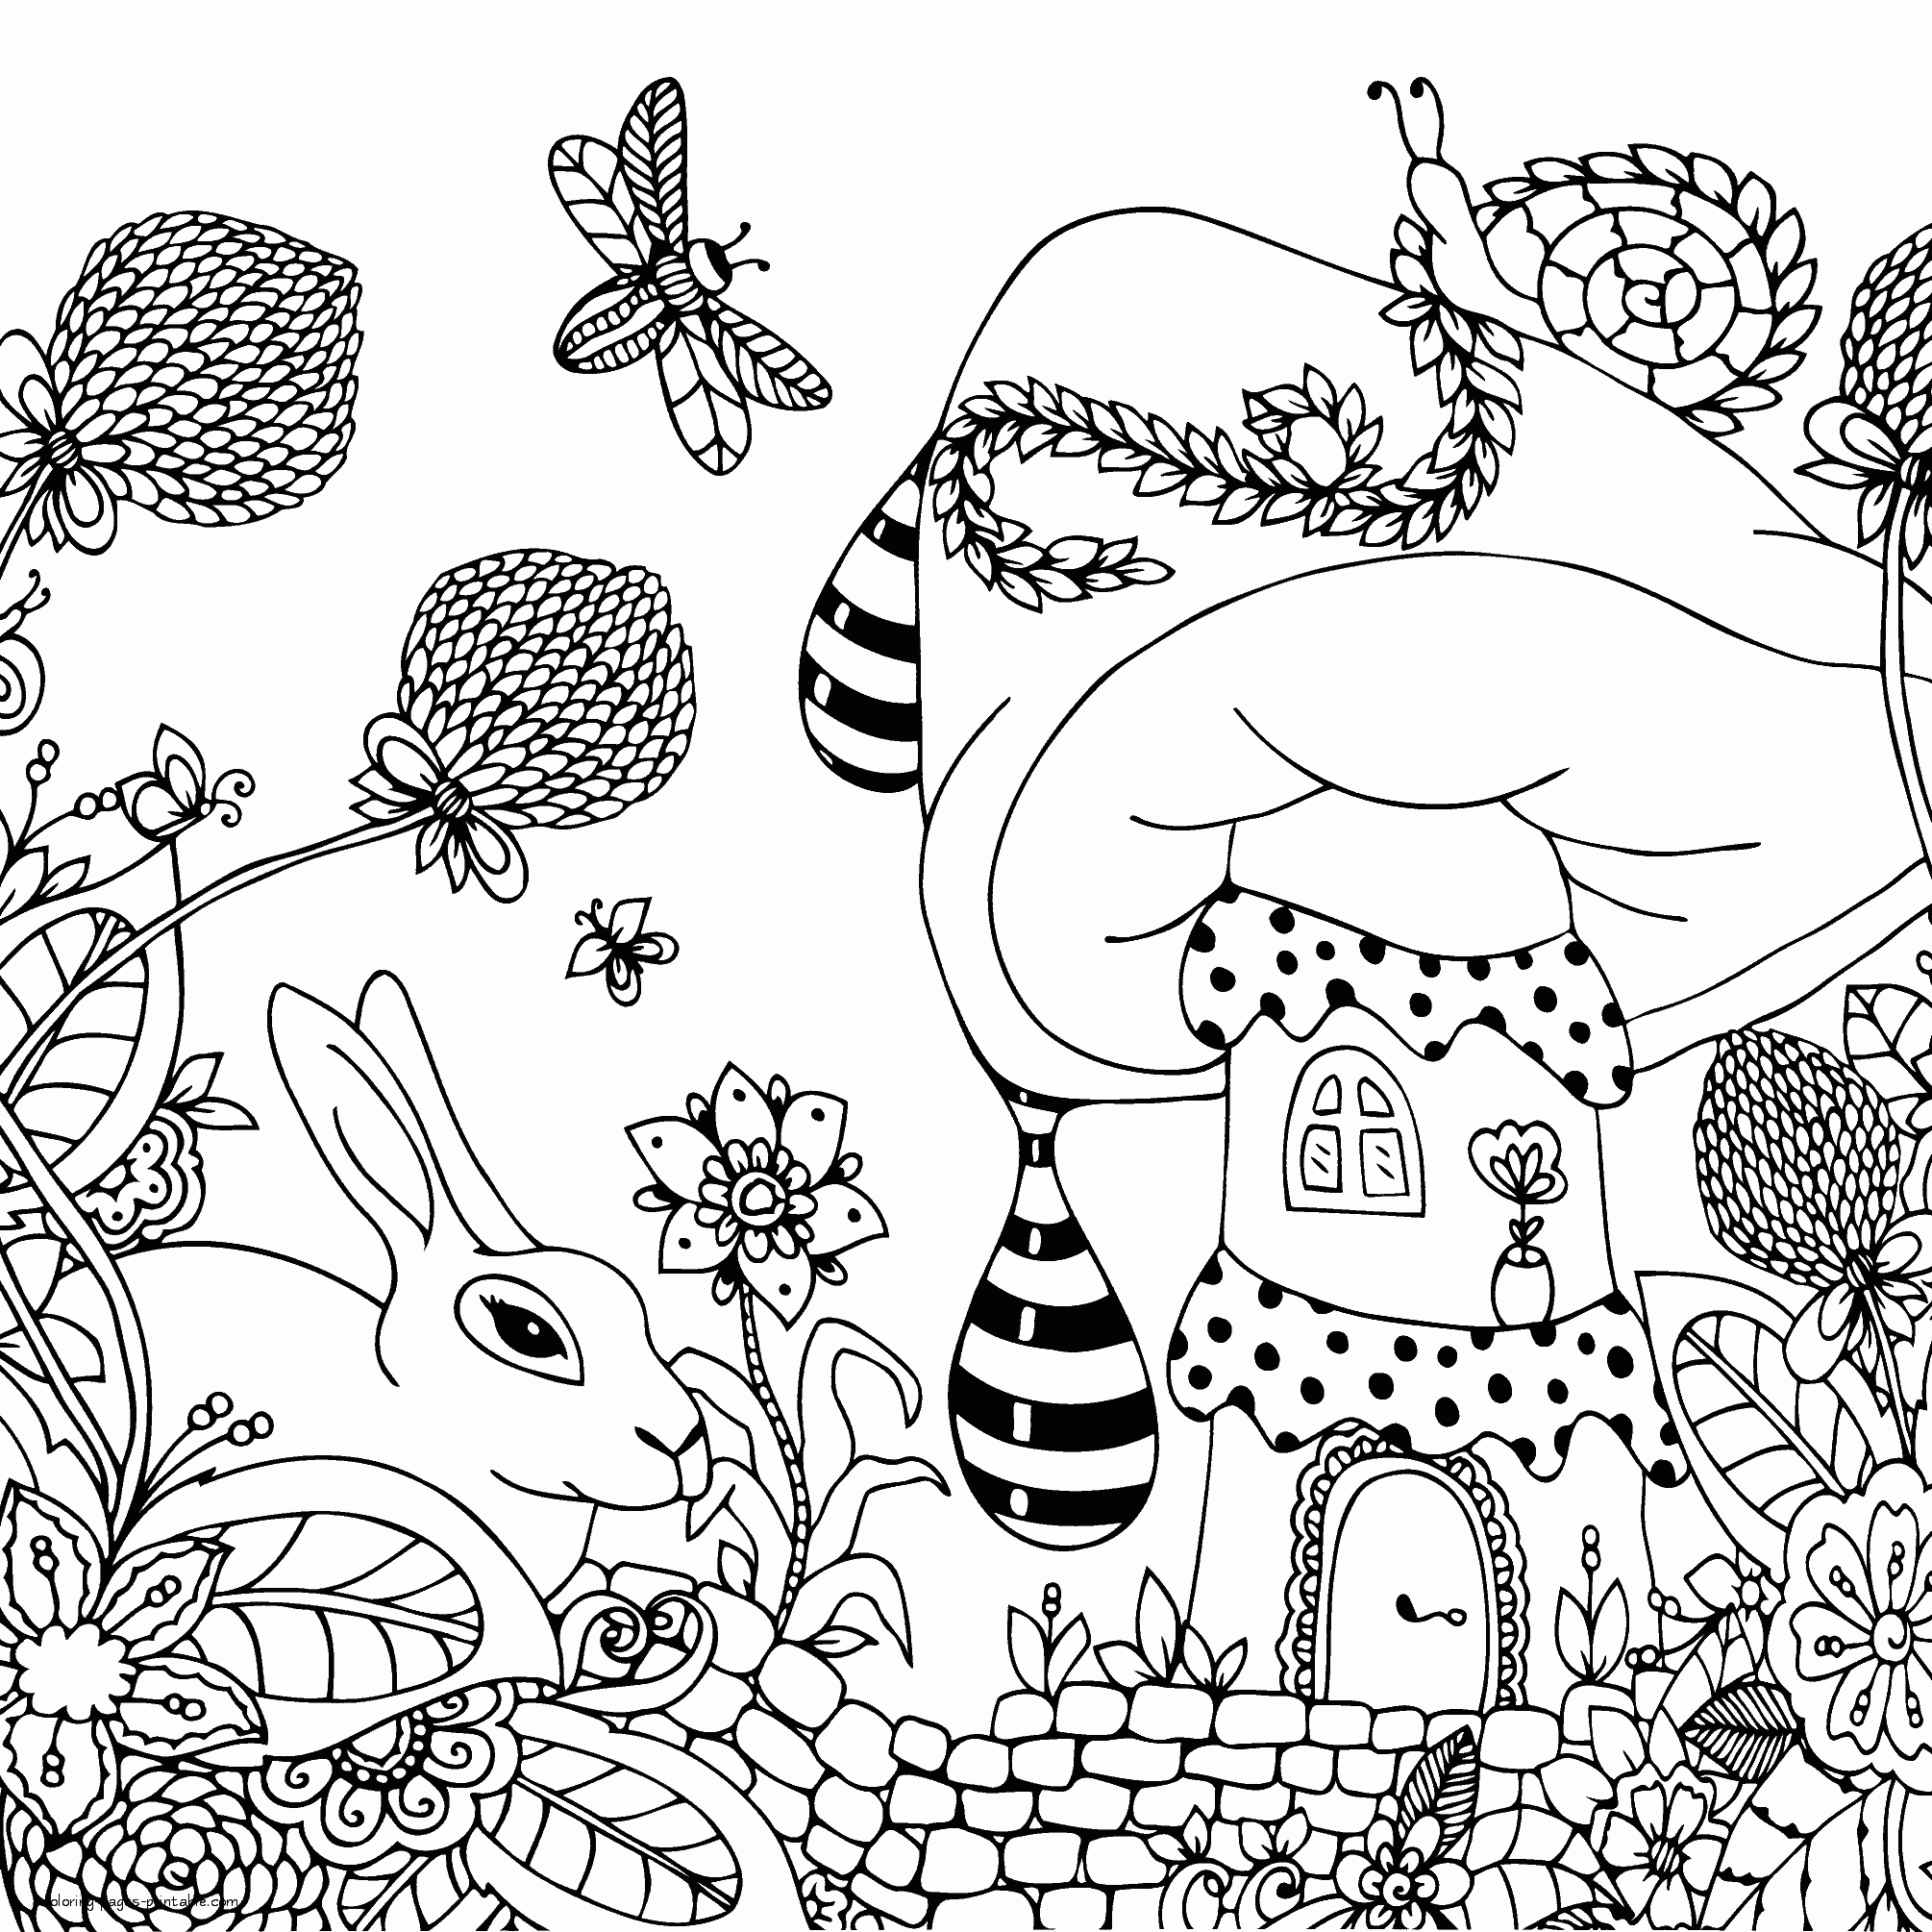 Rabbit Coloring Pages For Adults. Download Free